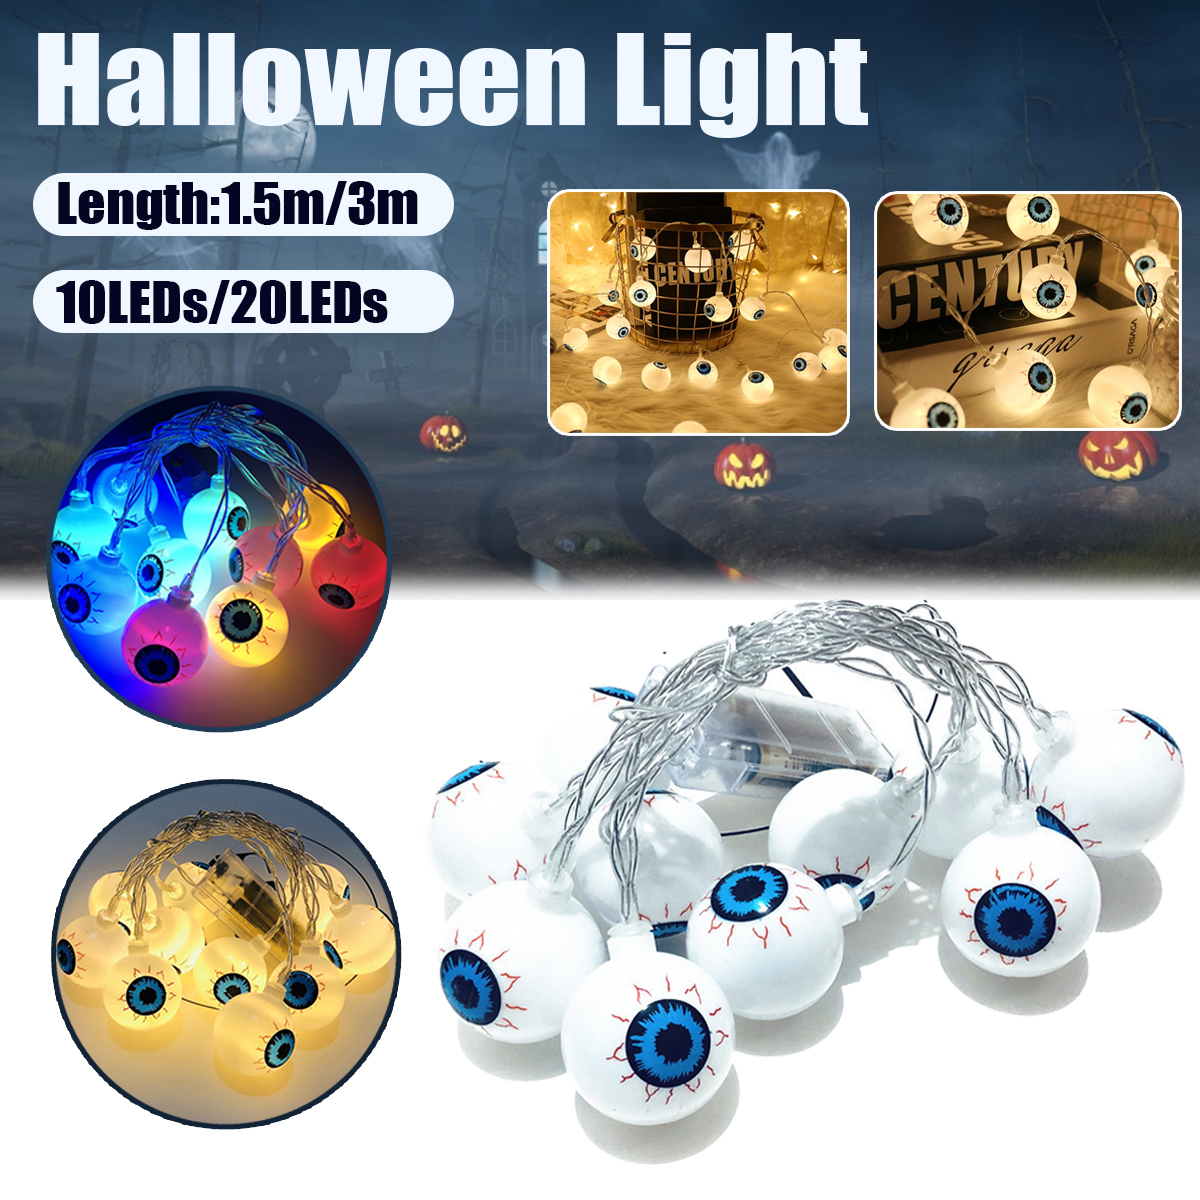 Halloween-LED-String-Lights-Decoration-Lights-Warm-White-for-Halloween-Home-Decoration-Accessorie-1798511-1